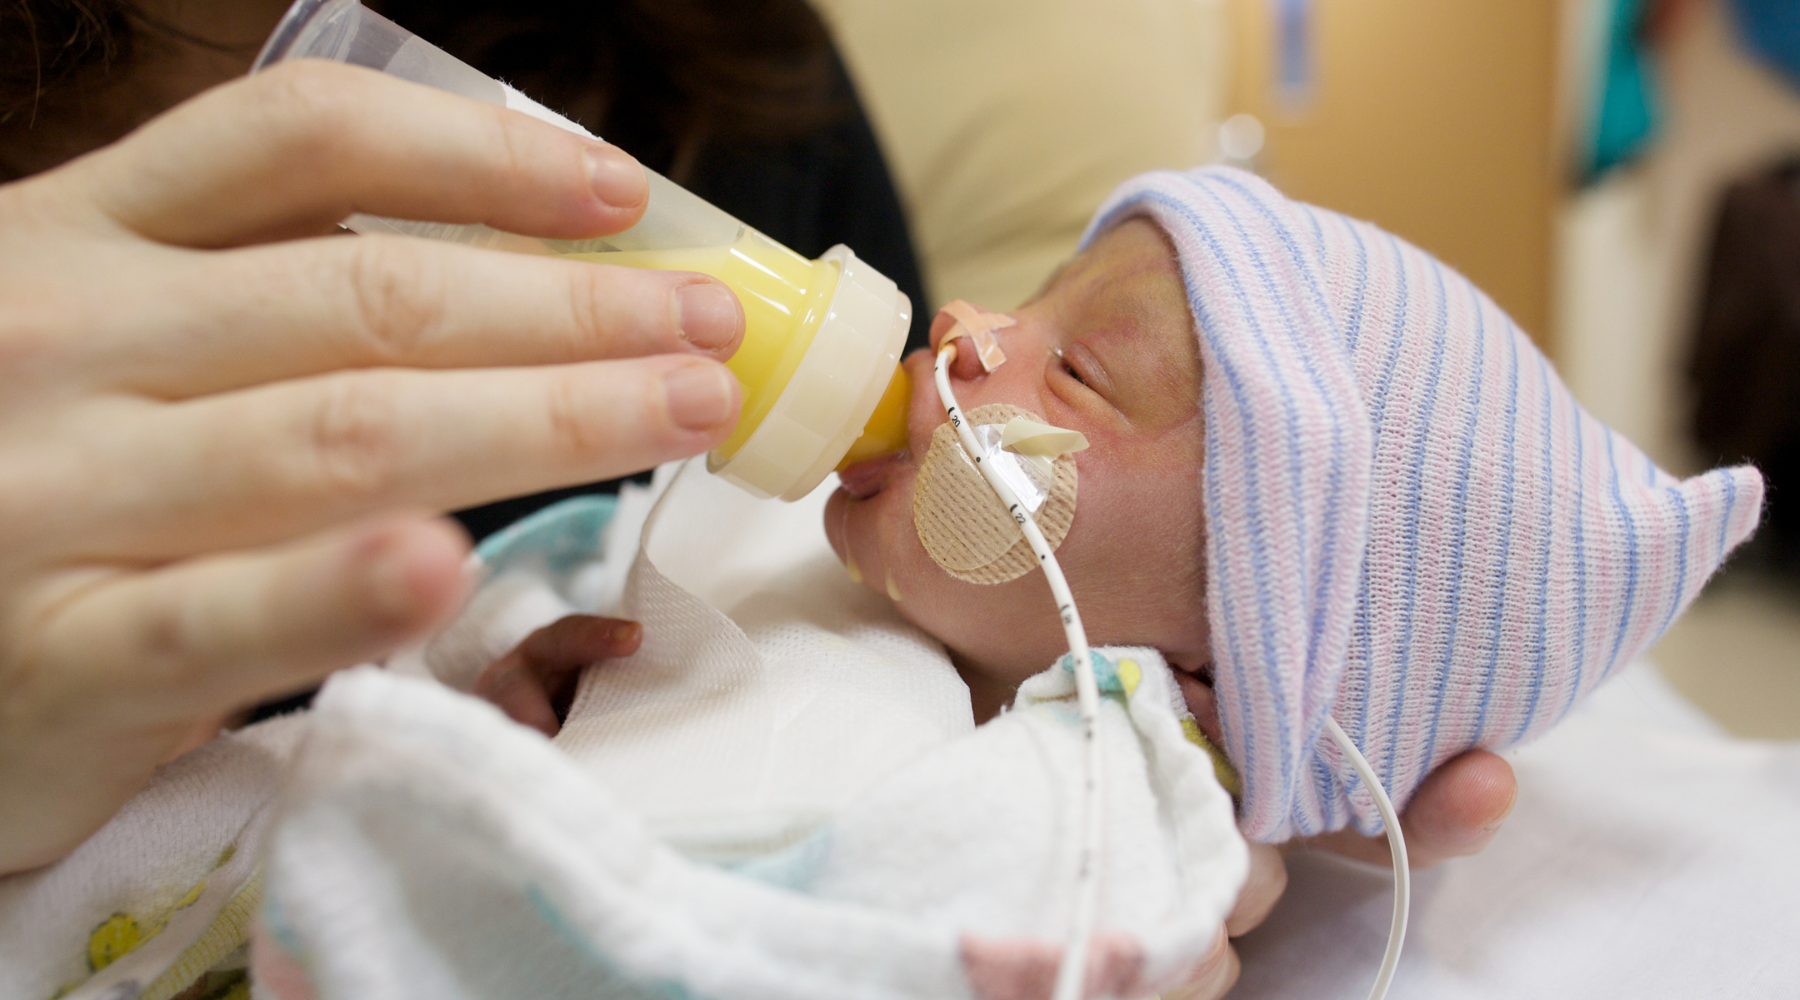 What size do preemie clothes fit?